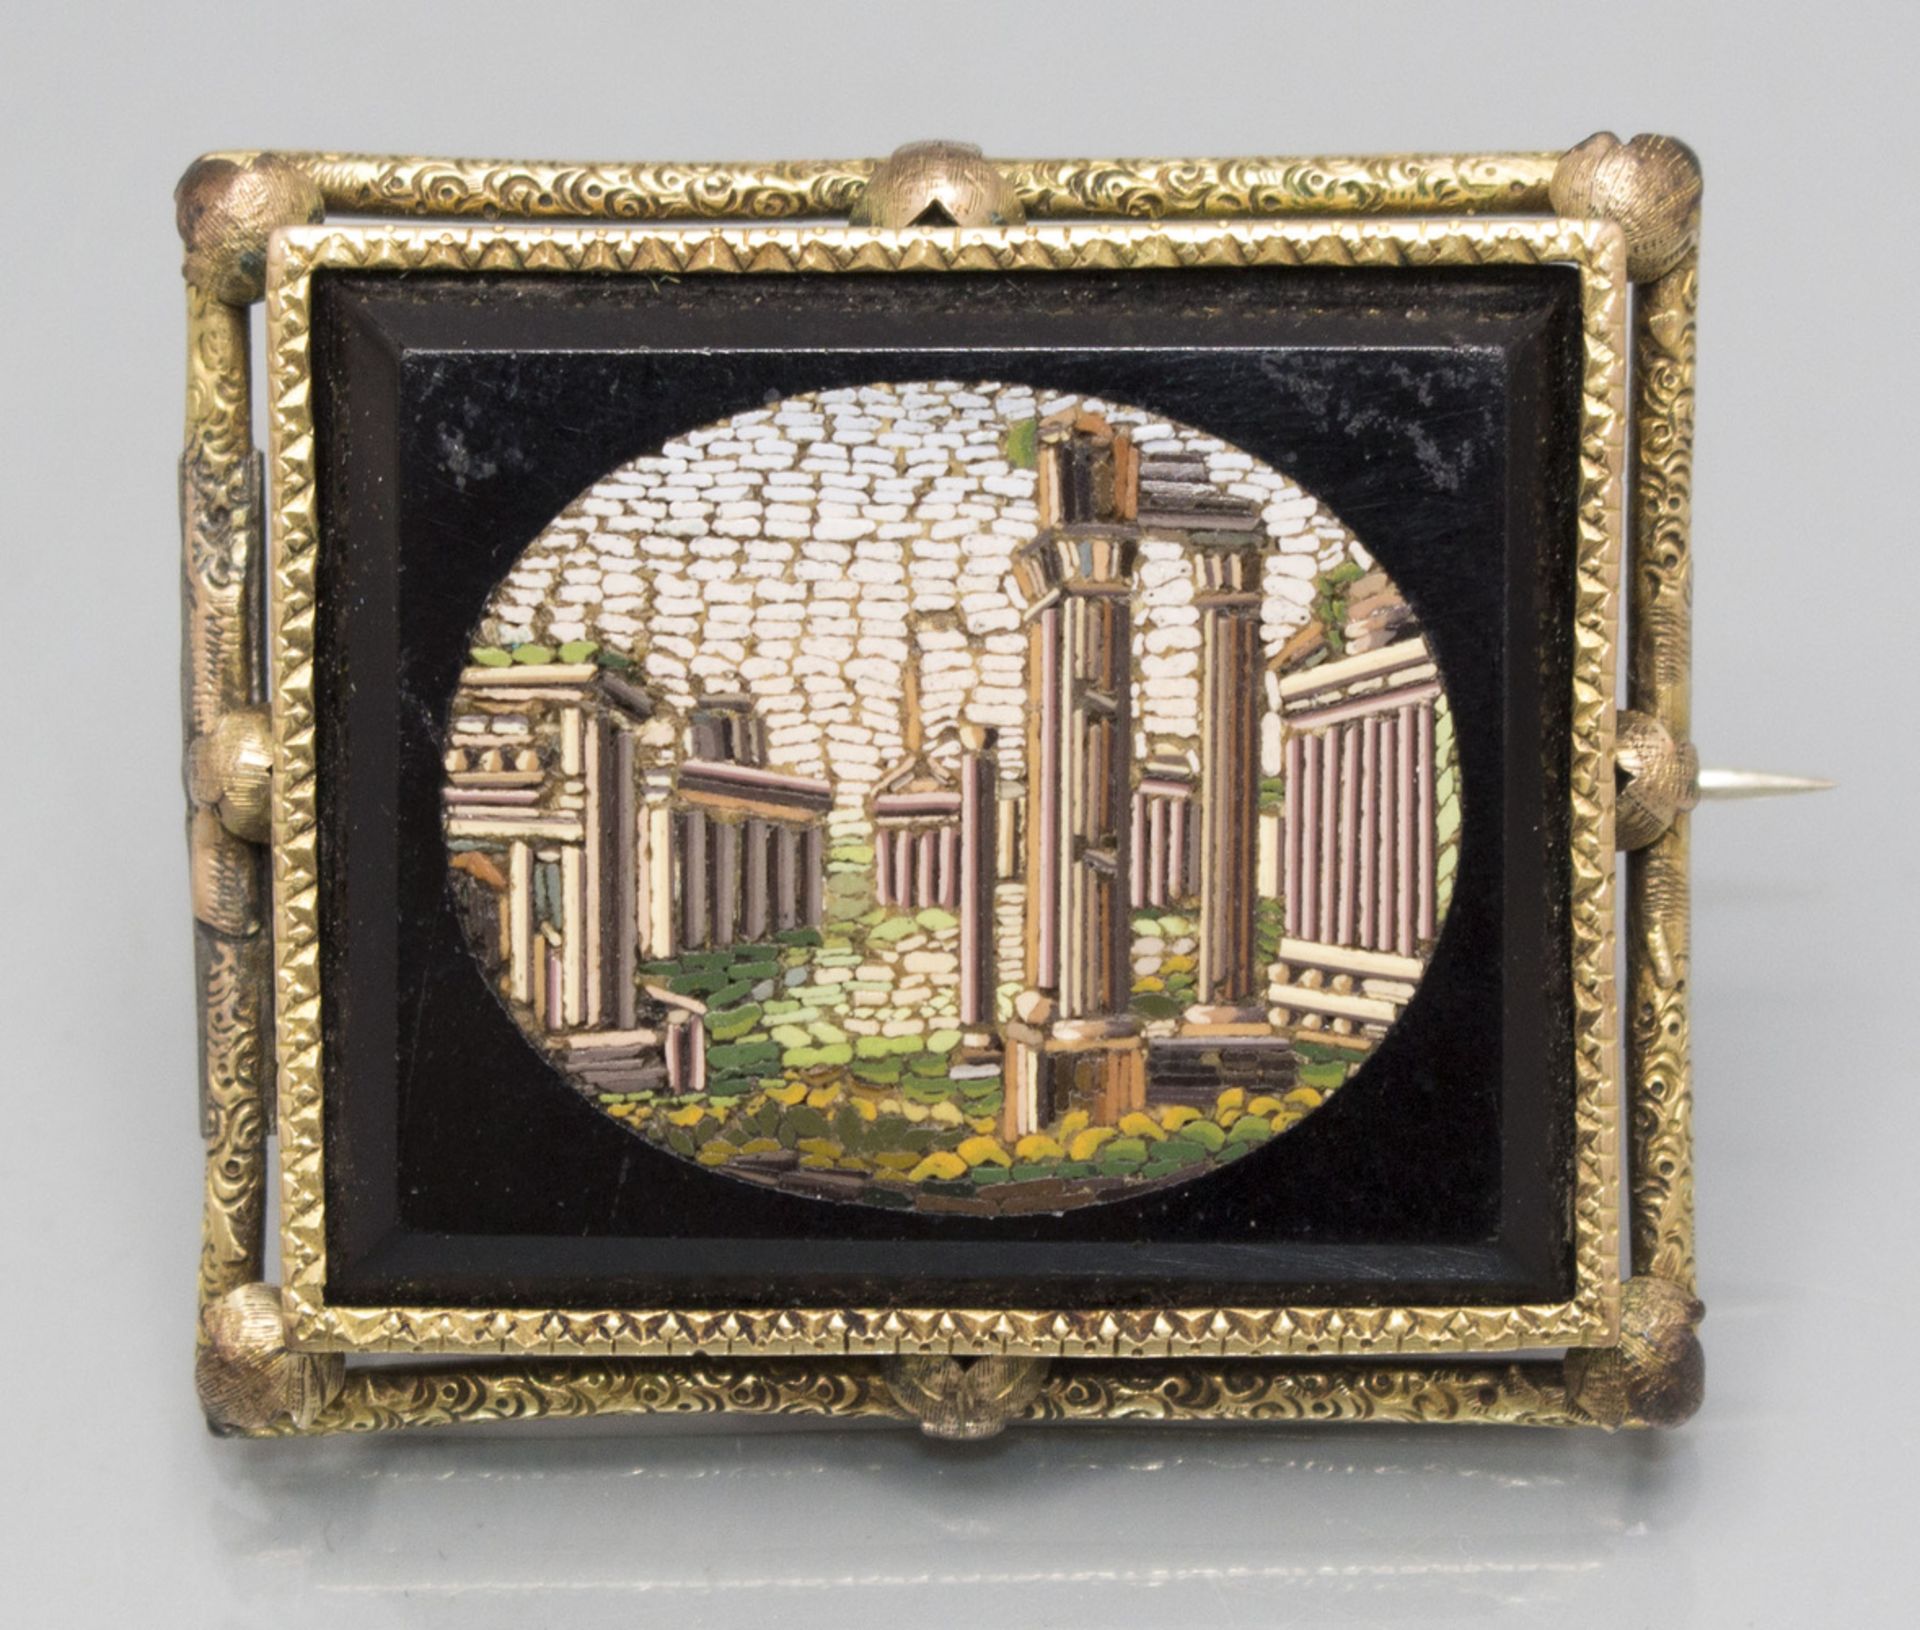 Mikromosaik Brosche / A micromosaic brooch with the view of Rome, Italien,19. Jh.